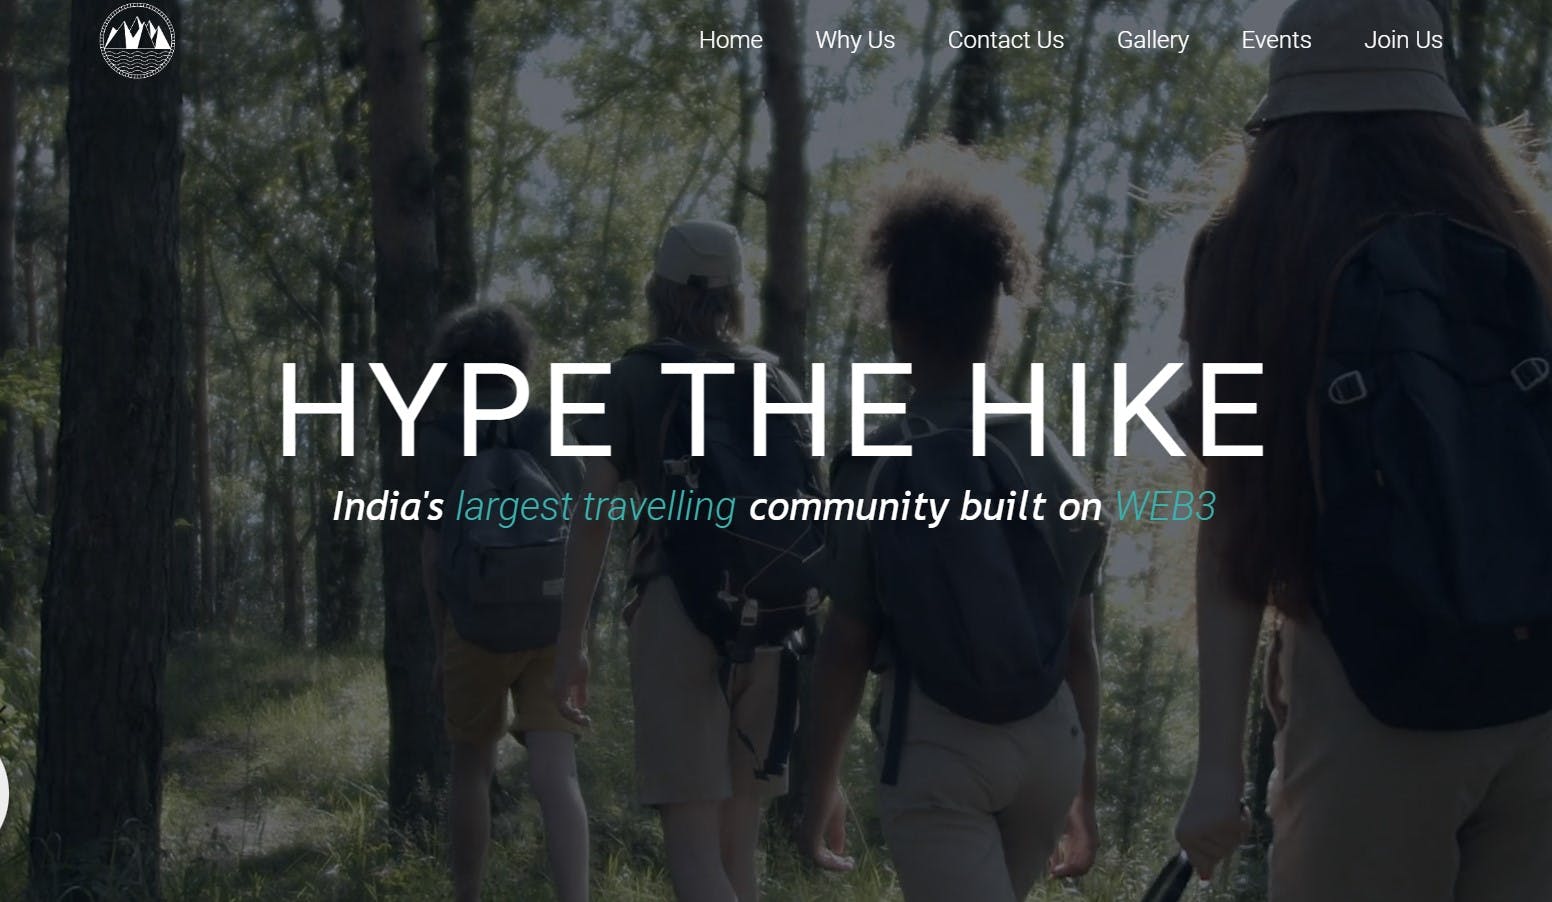 Hype the hike